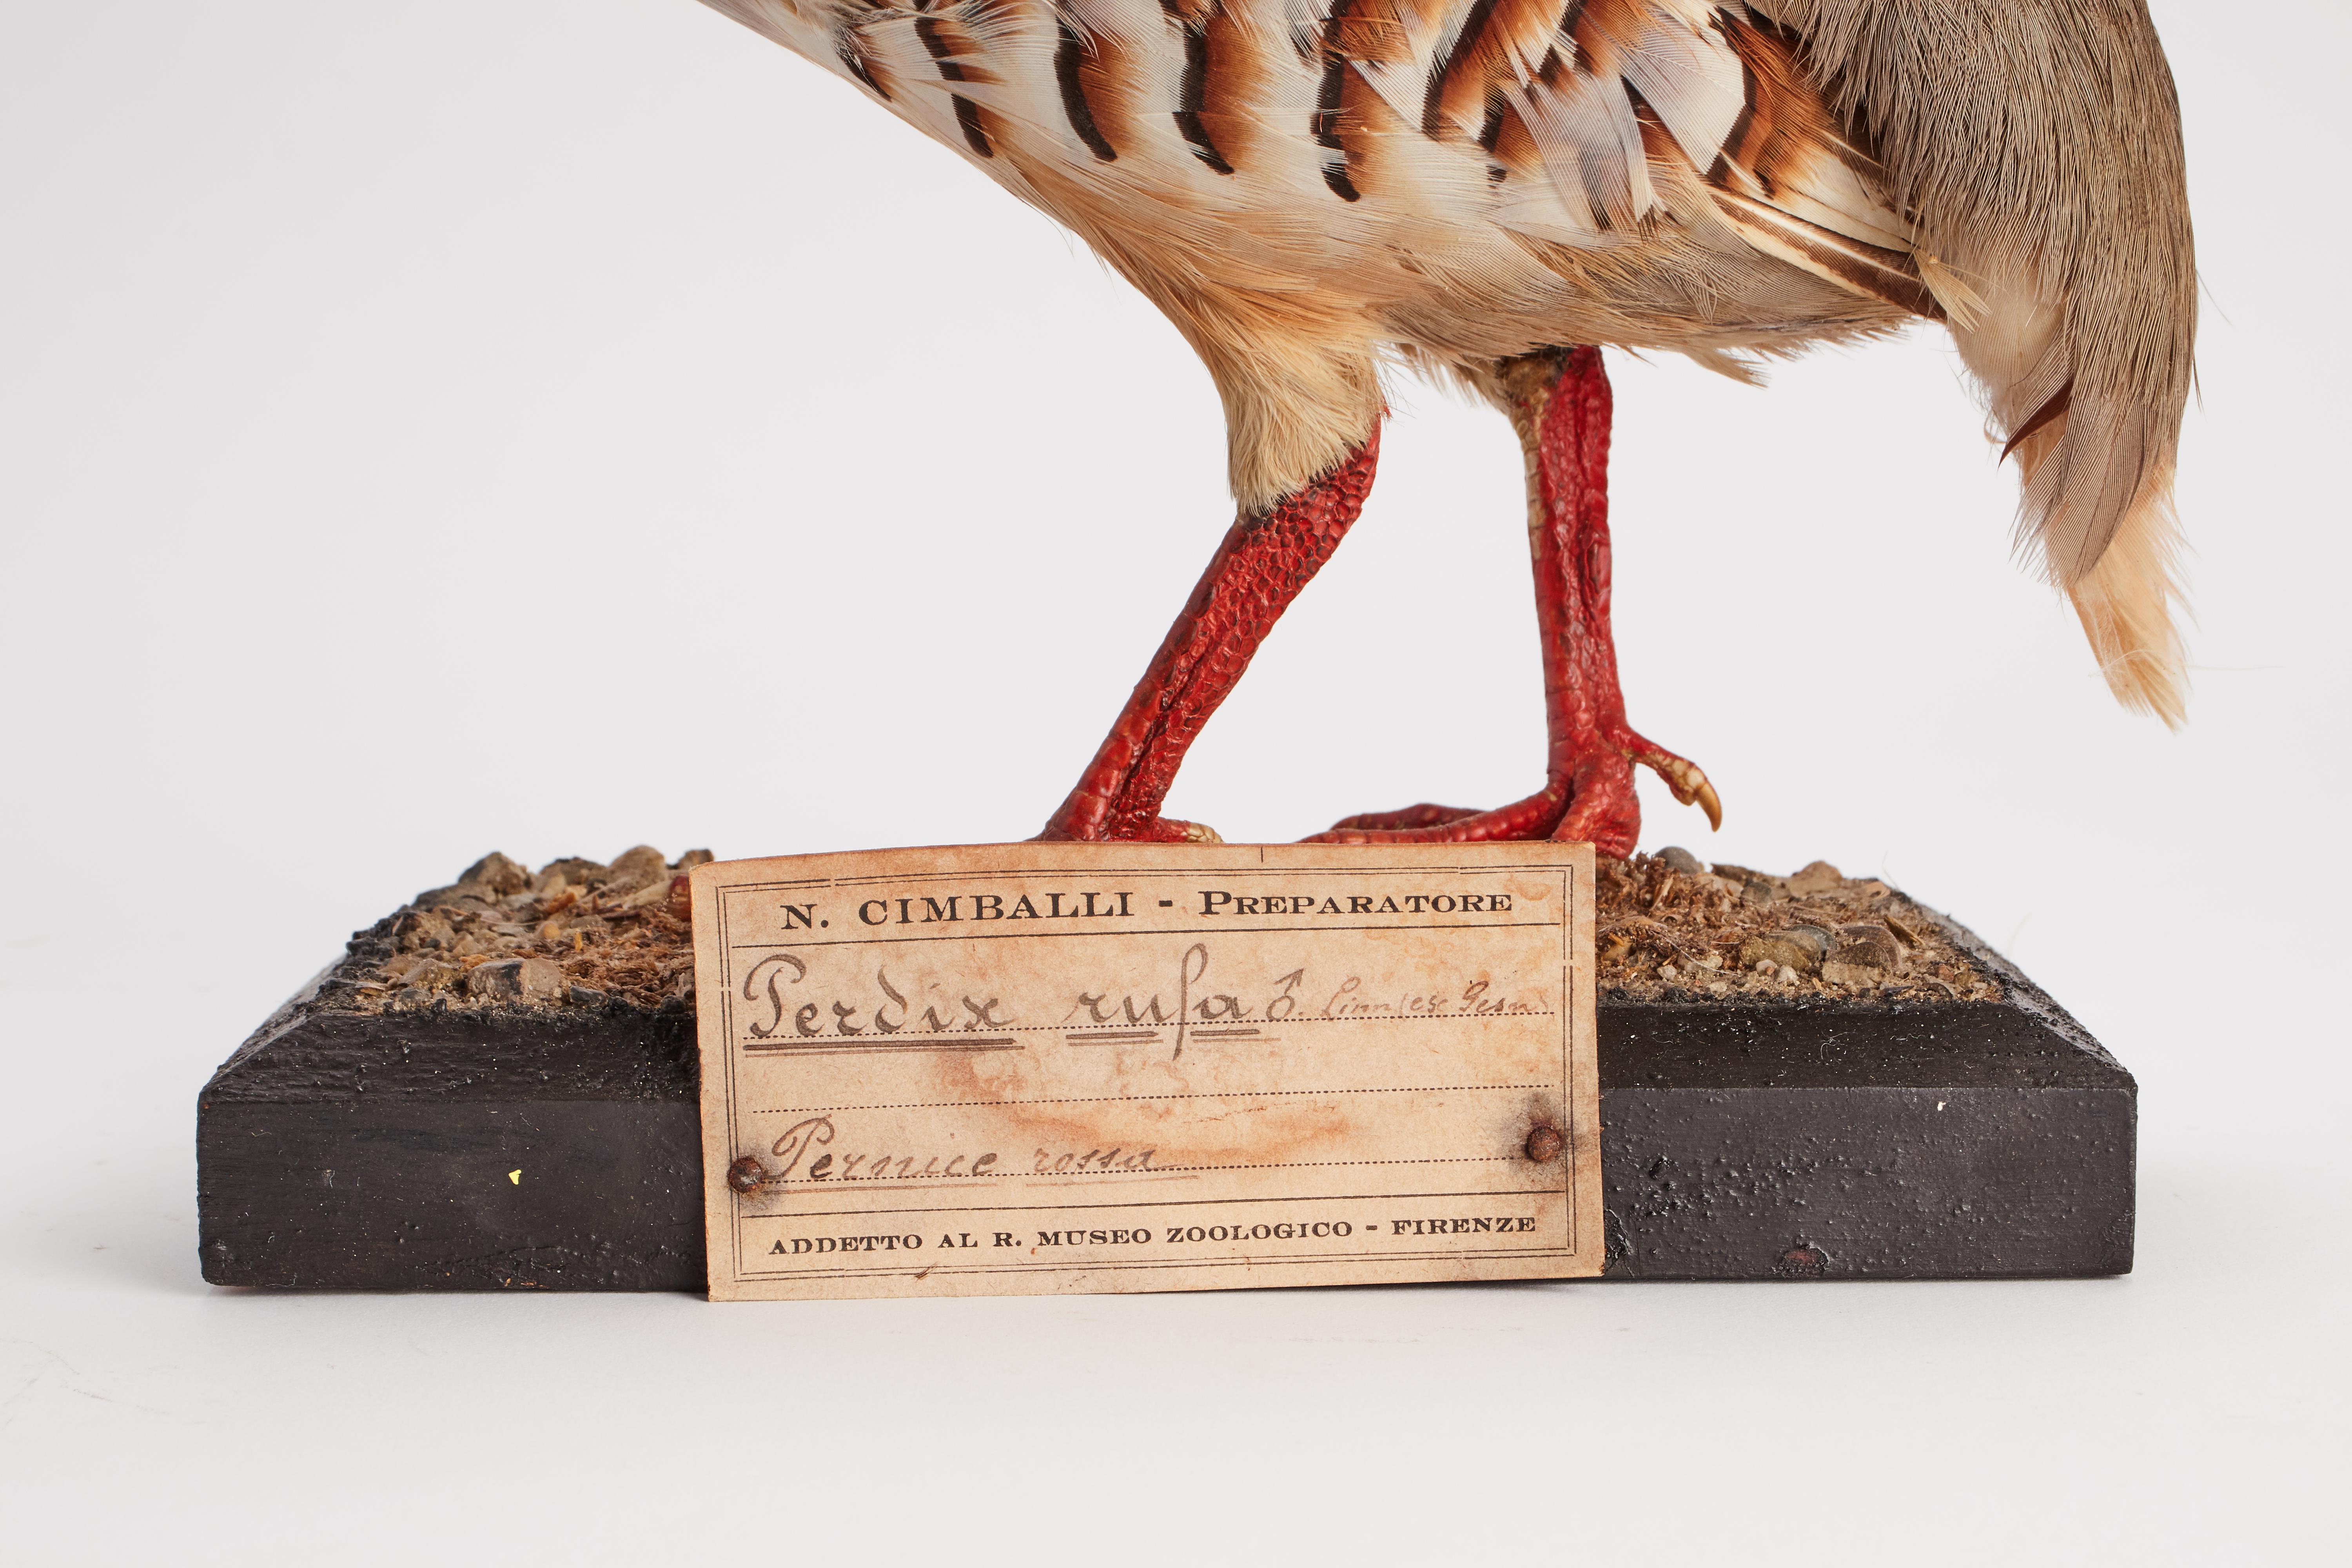 Natural specimen from Wunderkammer taxidermy Stuffed bird (Alectoris Graeca) Conturnice mounted on a wooden base with cartouche Specimen for laboratory and Natural history cabinet. S. Broggi Naturalista. Siena, Italy, circa 1880.